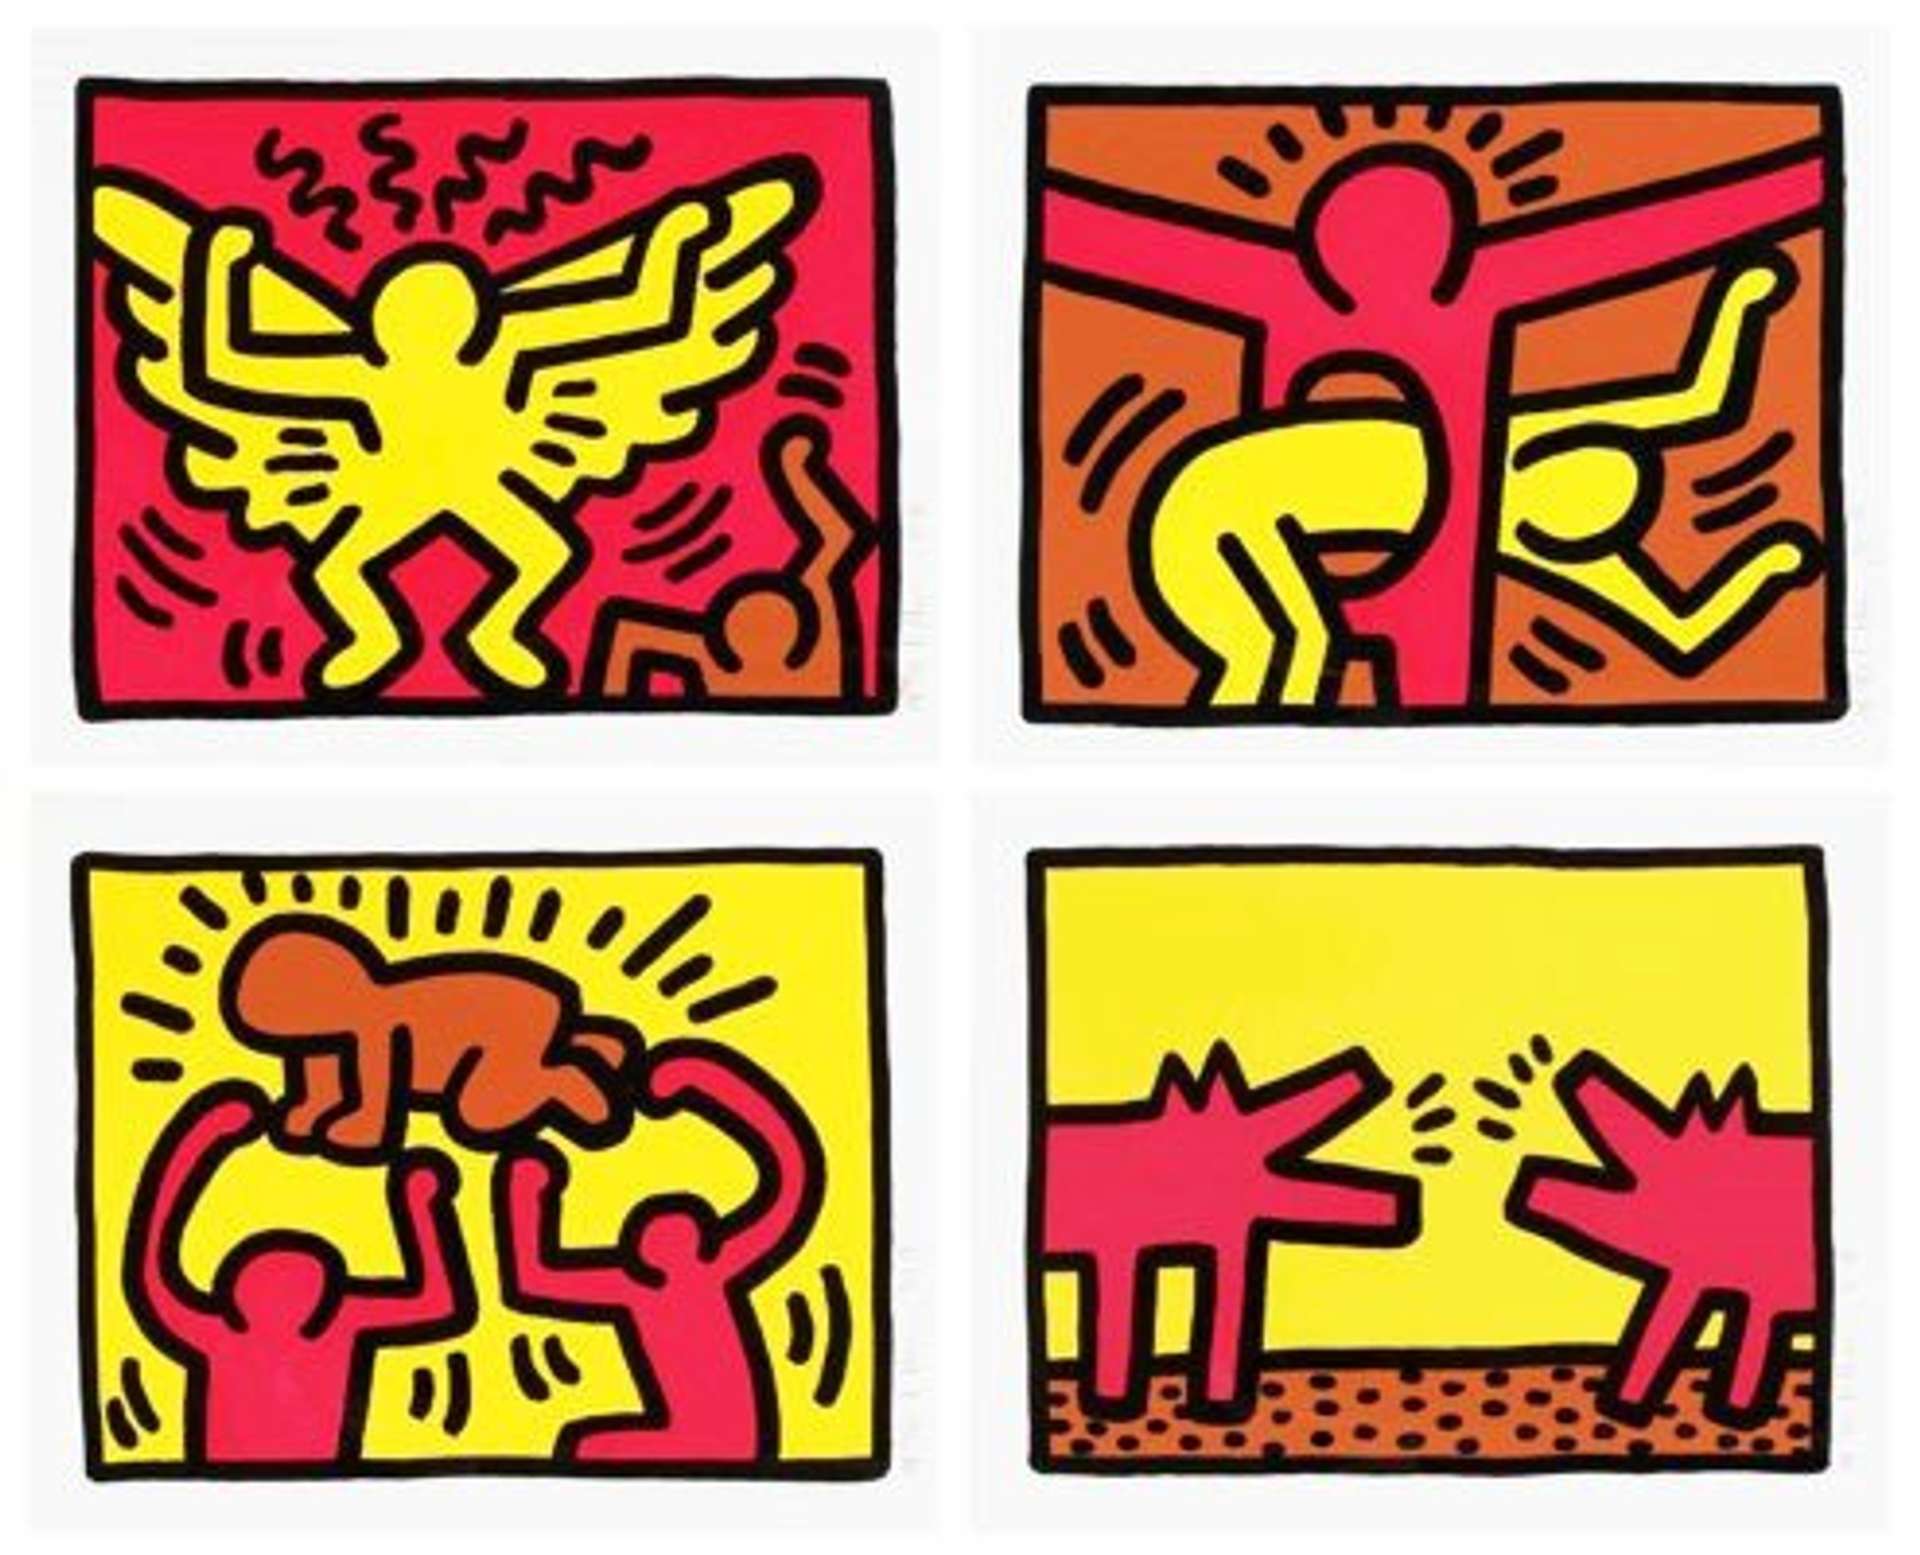 Pop Shop Quad IV by Keith Haring